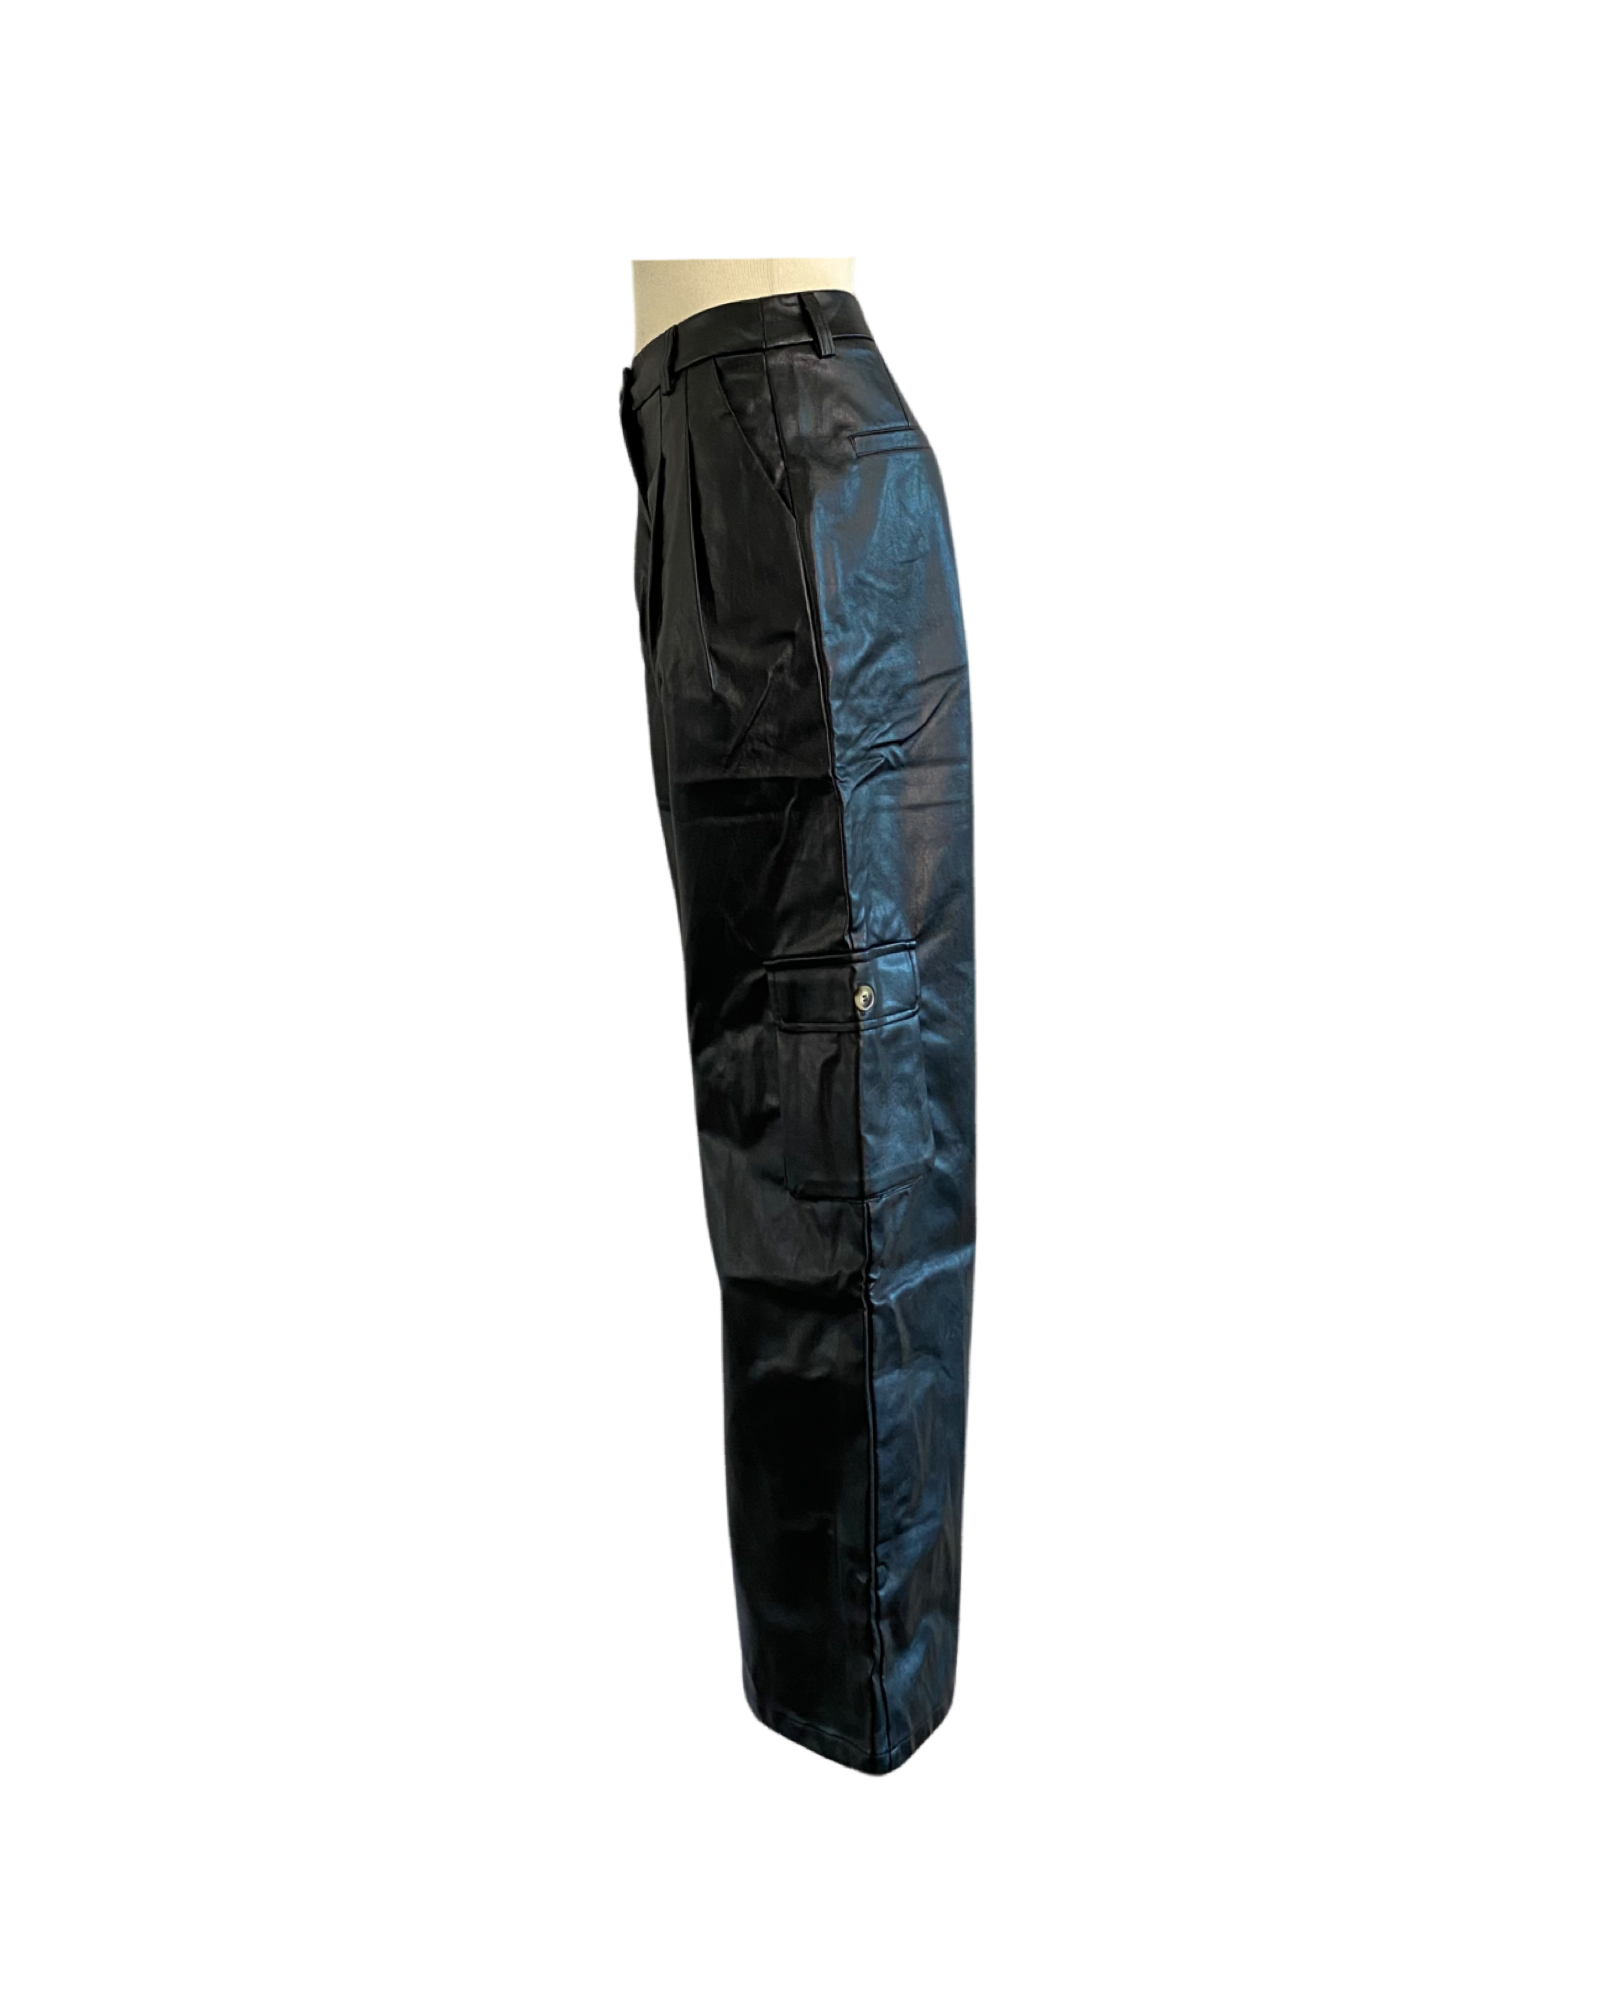 WIDE FIT CARGO VEGAN LEATHER PANTS